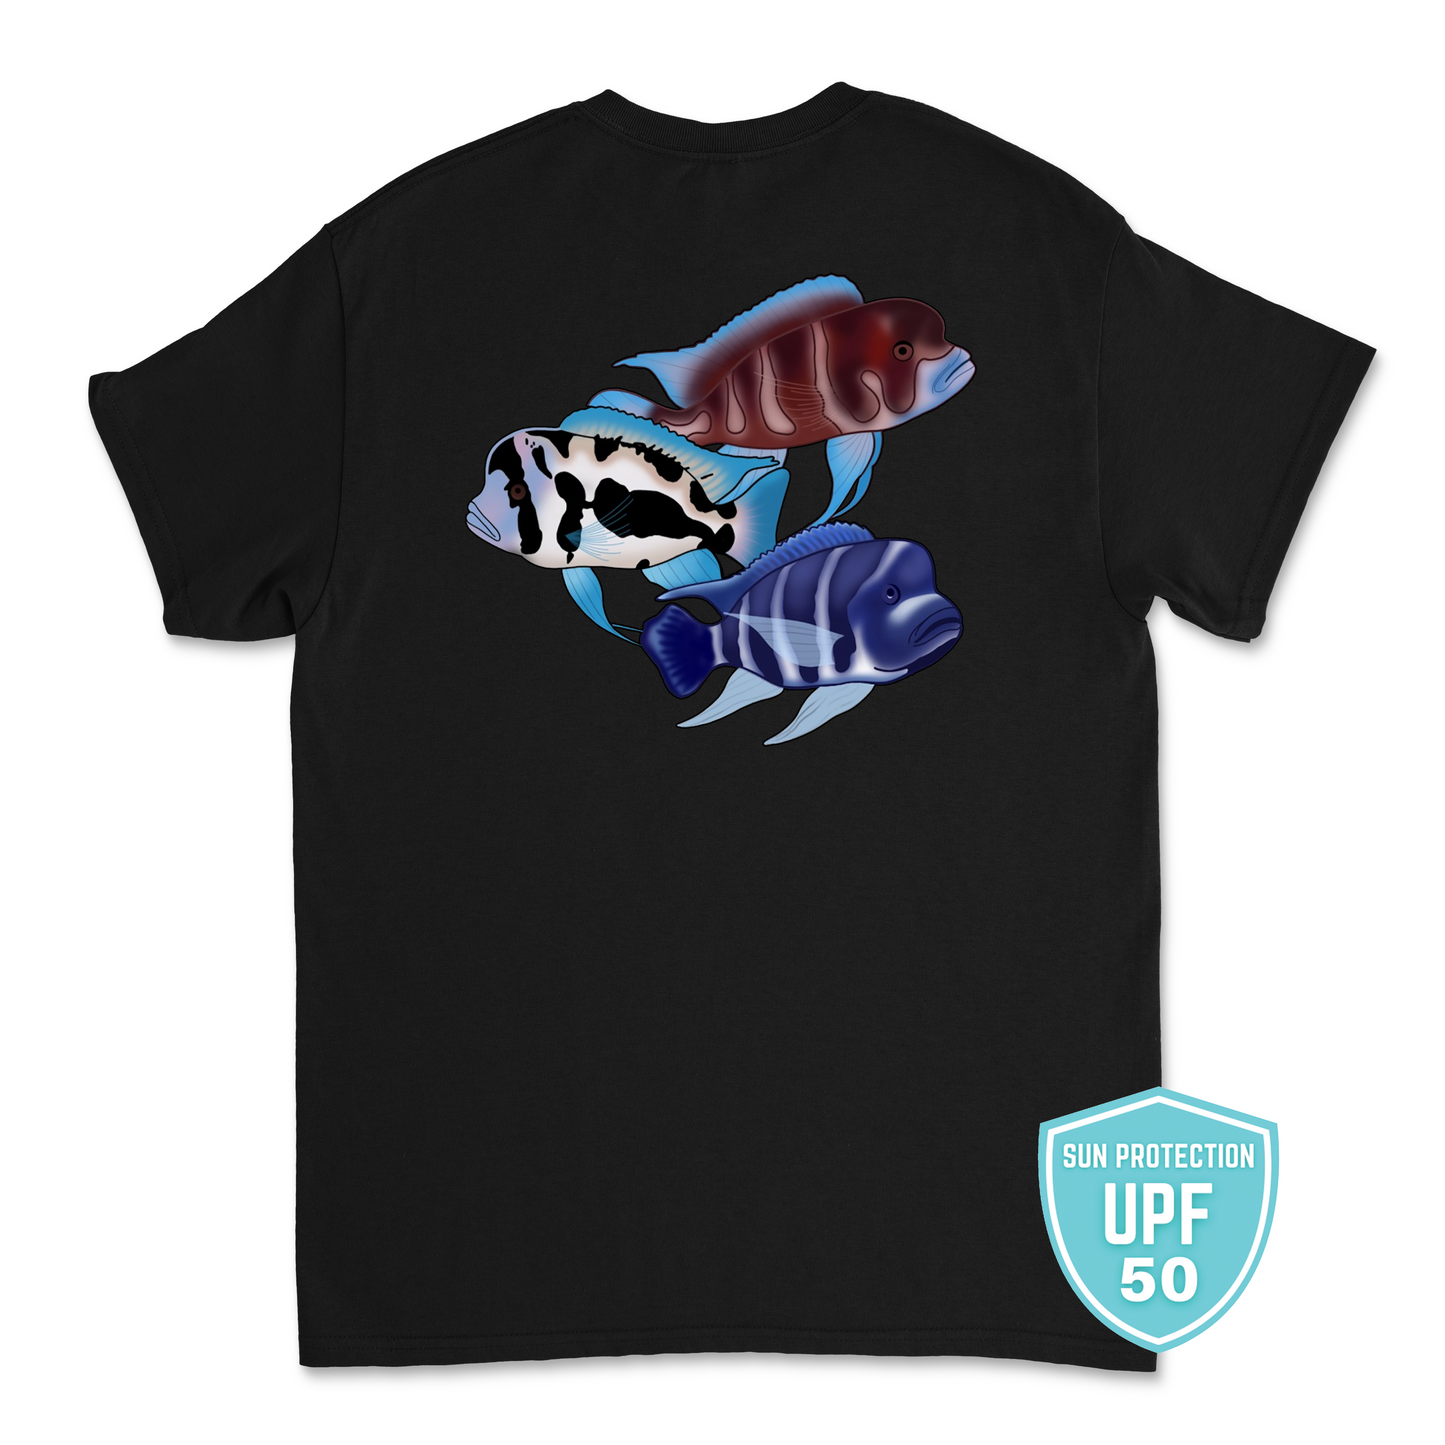 The Tank Life Apparel frontosa cichlid design on an athletic dri fit performance shirt.  Three fish Black widow, red frontosa, blue zaire. Blue fish with dark stripes.